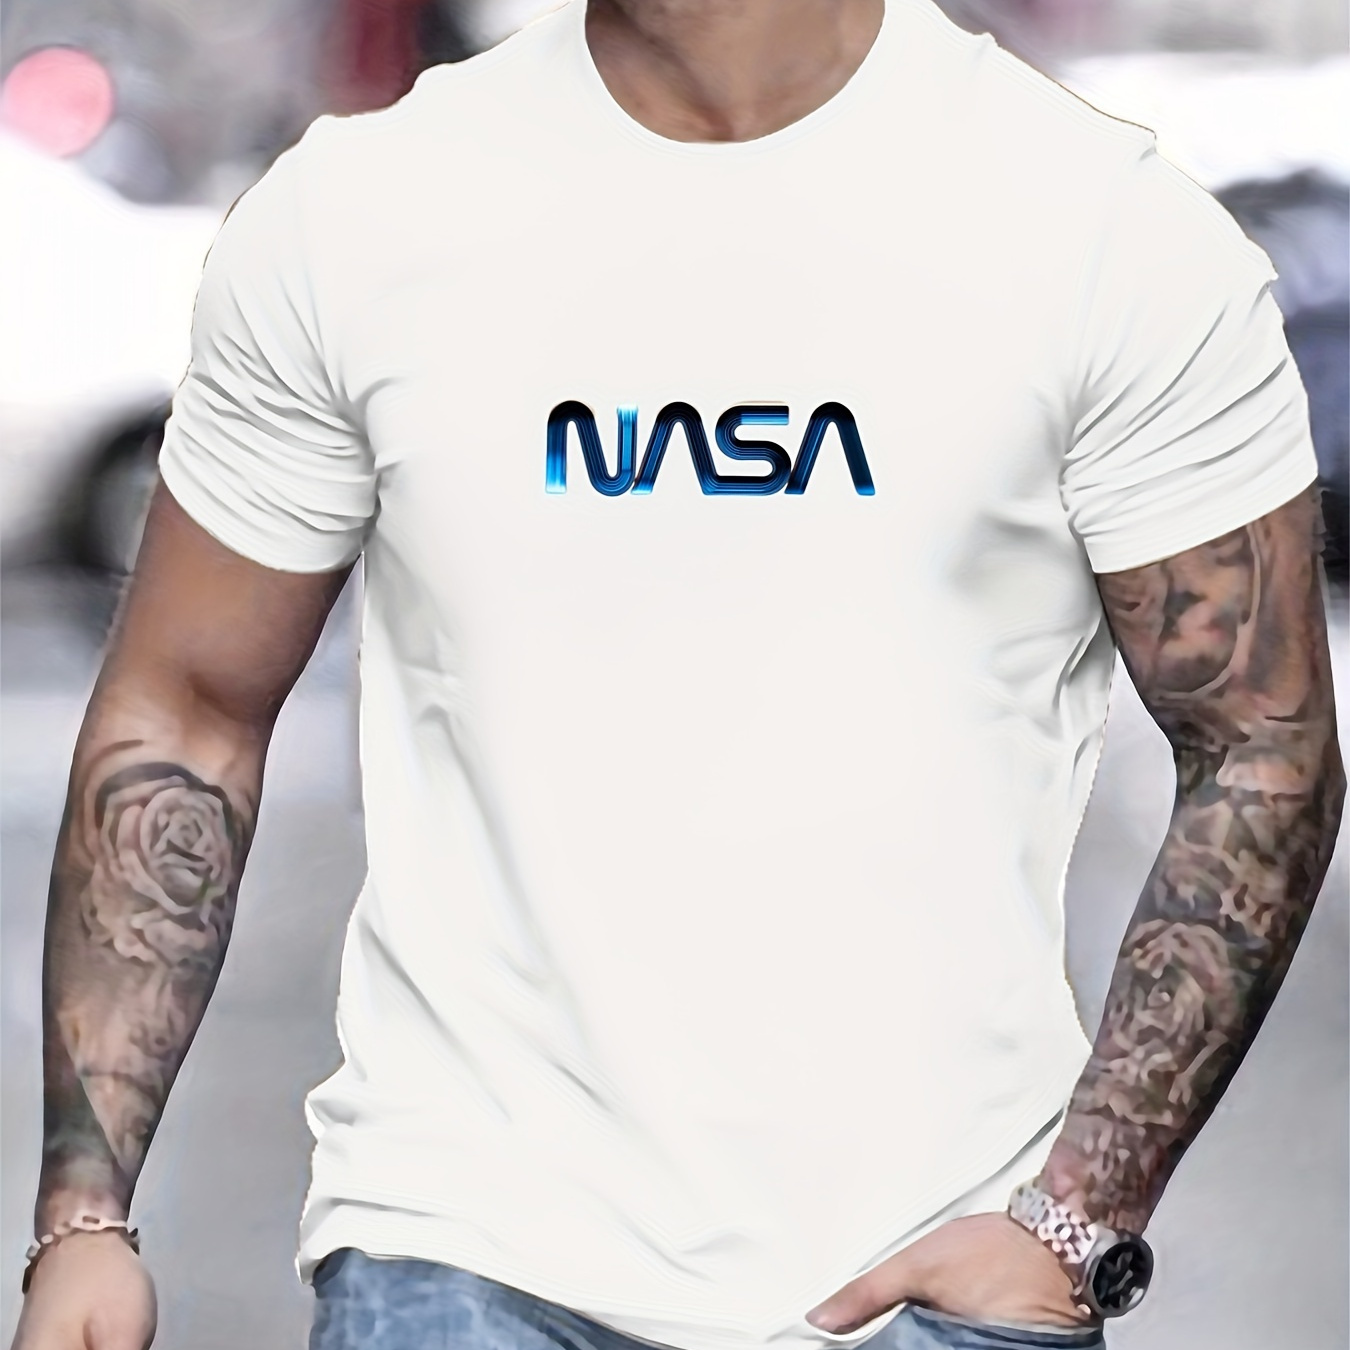 

Unique Nasa, Fashion Tees For Men, Casual Cool Short Sleeve T-shirt For Summer